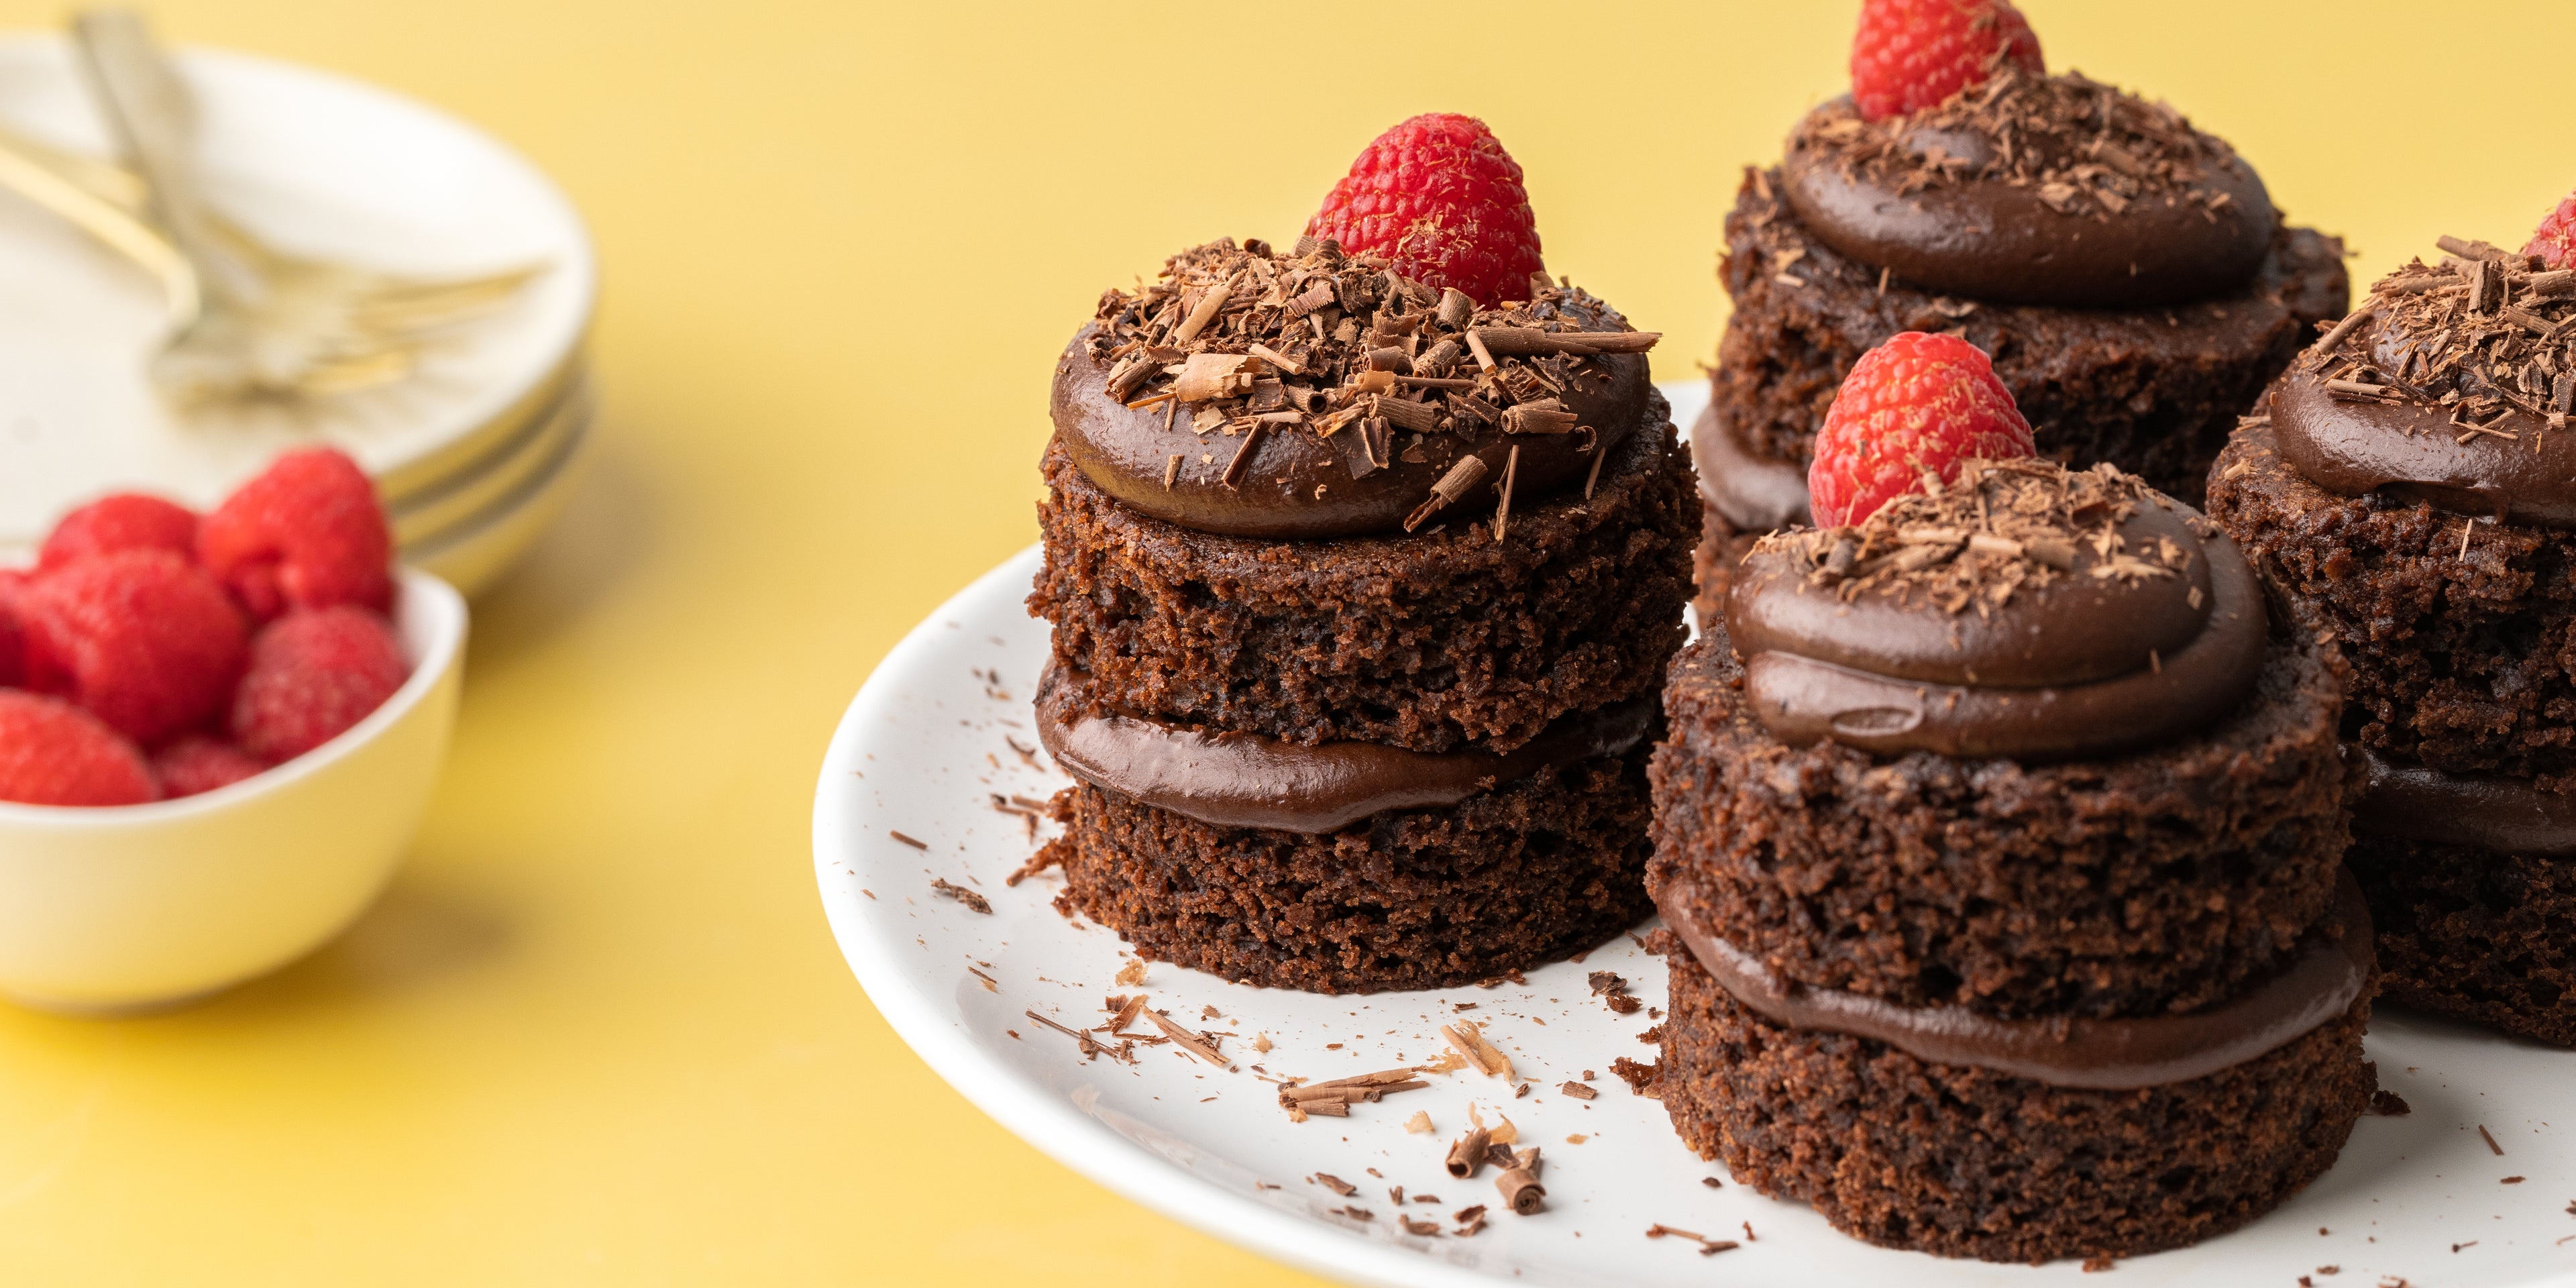 4 mini chocolate cakes on a plate with raspberries on top, beside a white bowl of raspberries